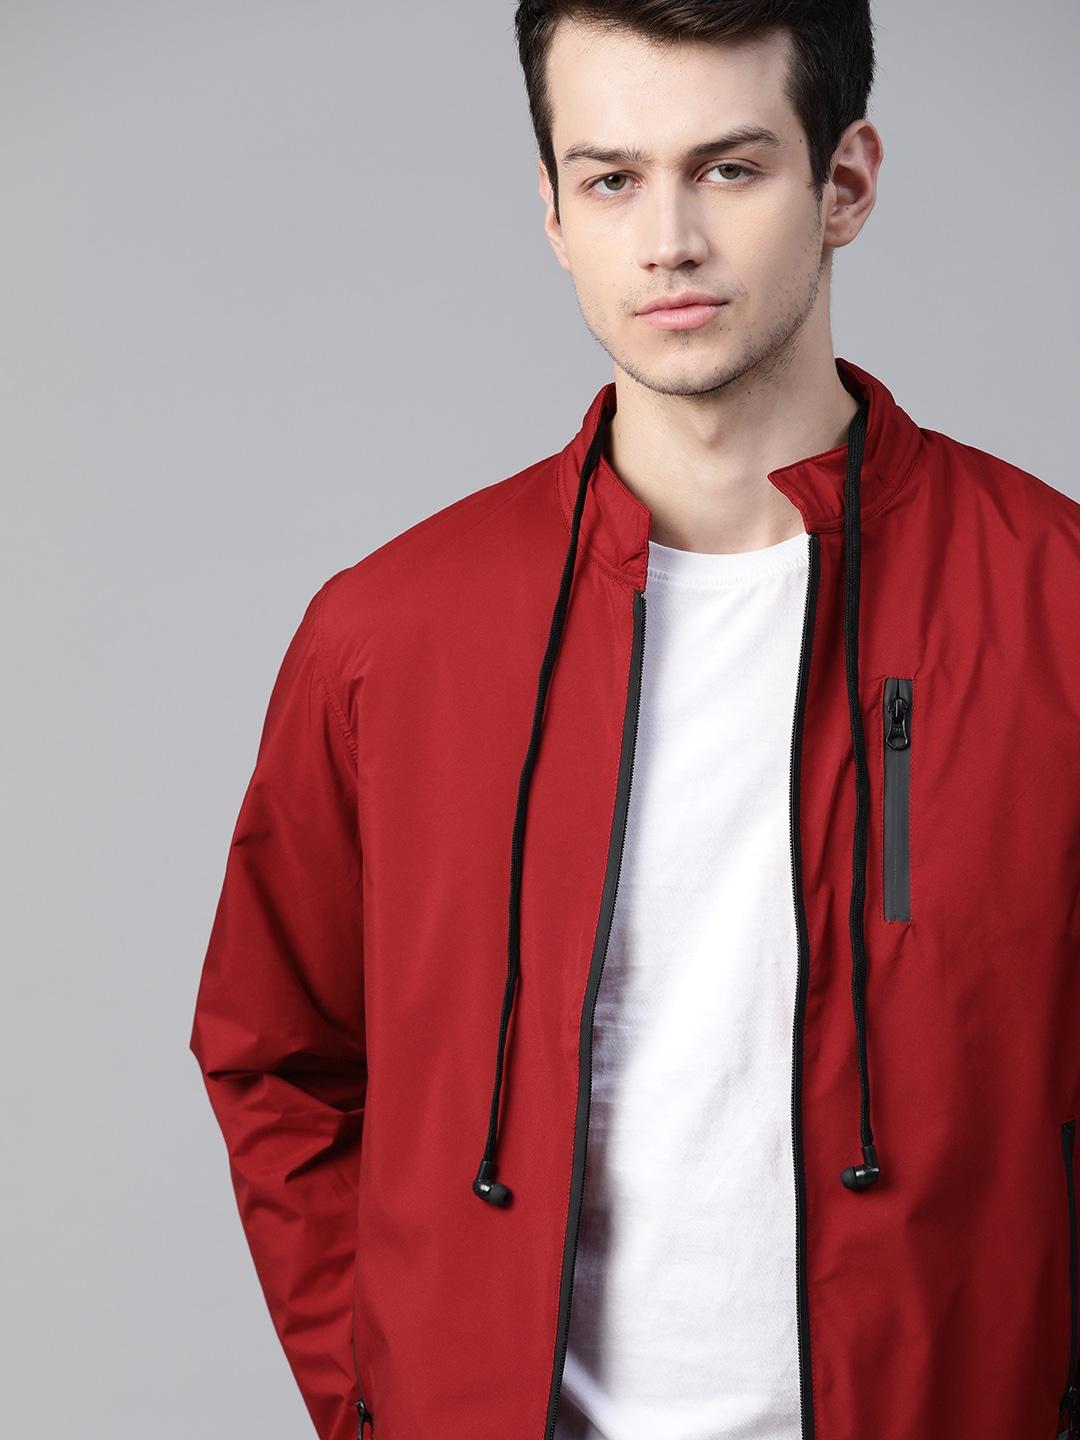 roadster men maroon solid tailored jacket with attached earphones